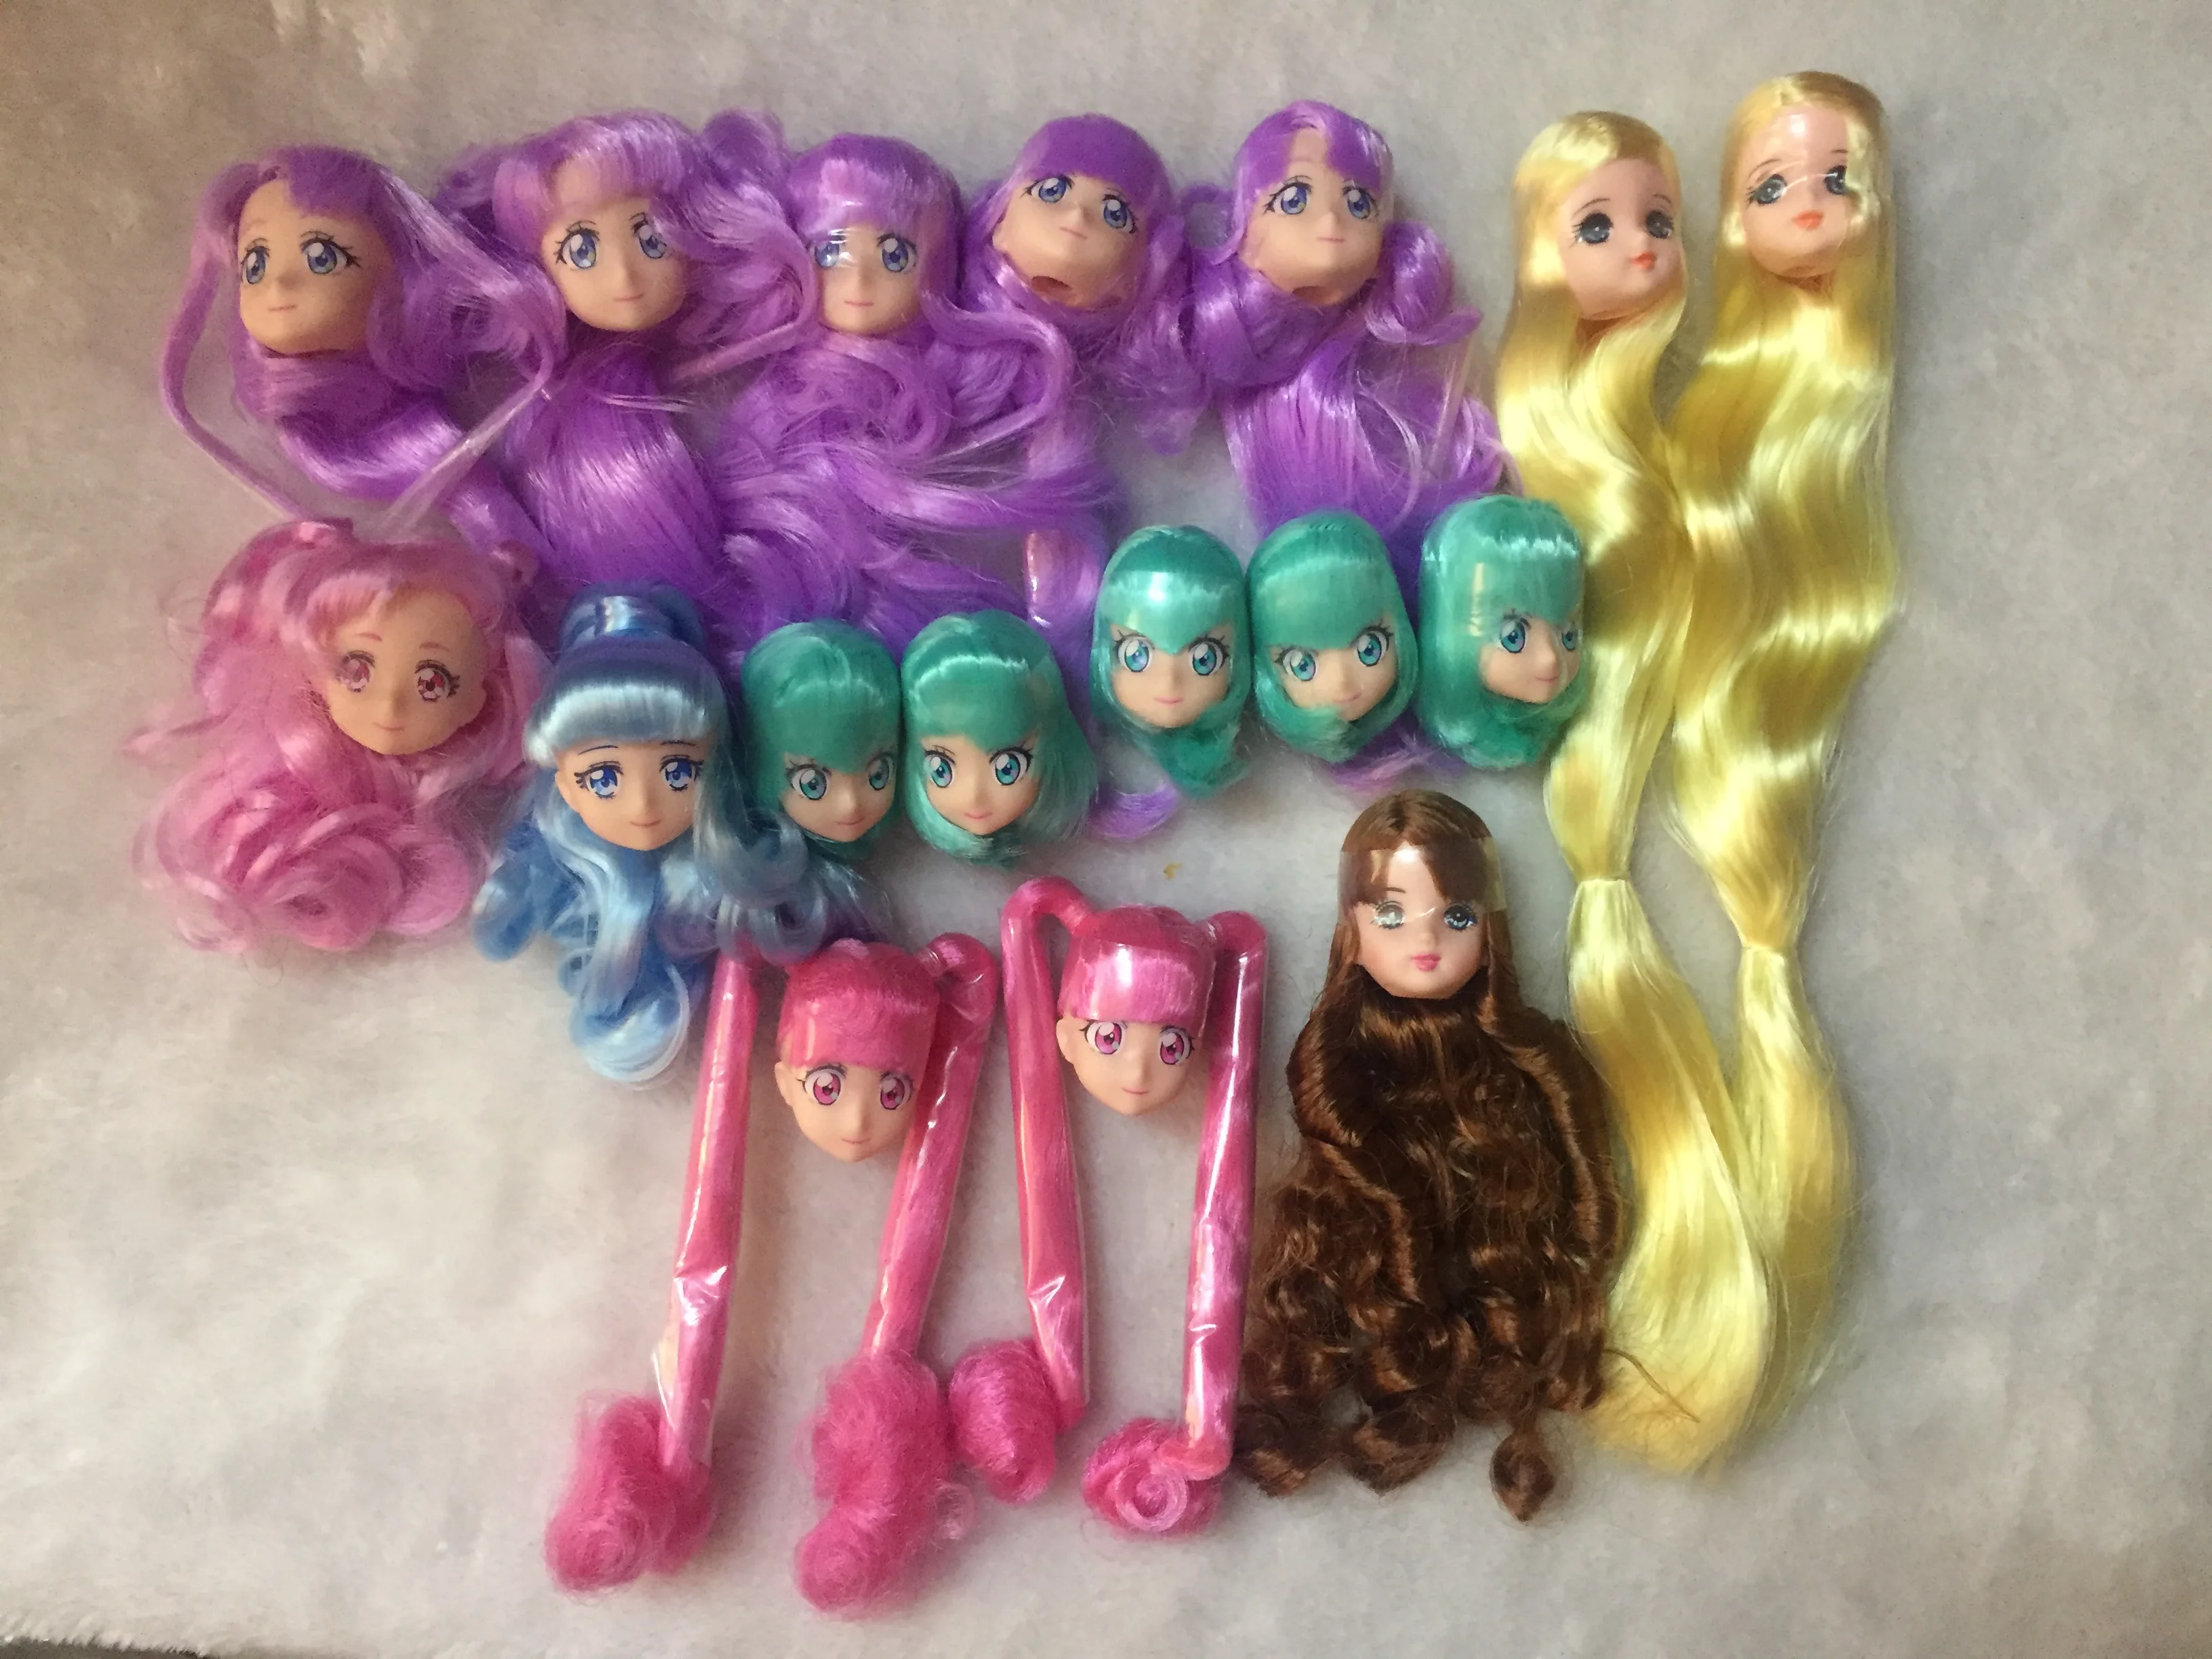 Long Hair Licca Doll Heads Short Long Curve Hair Soft Gold Black Yellow Hair Doll Heads Boy Girl Doll Parts DIY Accessories Toy metric long chrome socket set 1 4inch drive hex deep socket from 4mm to 14mm professional wrench heads ratchet tool accessories